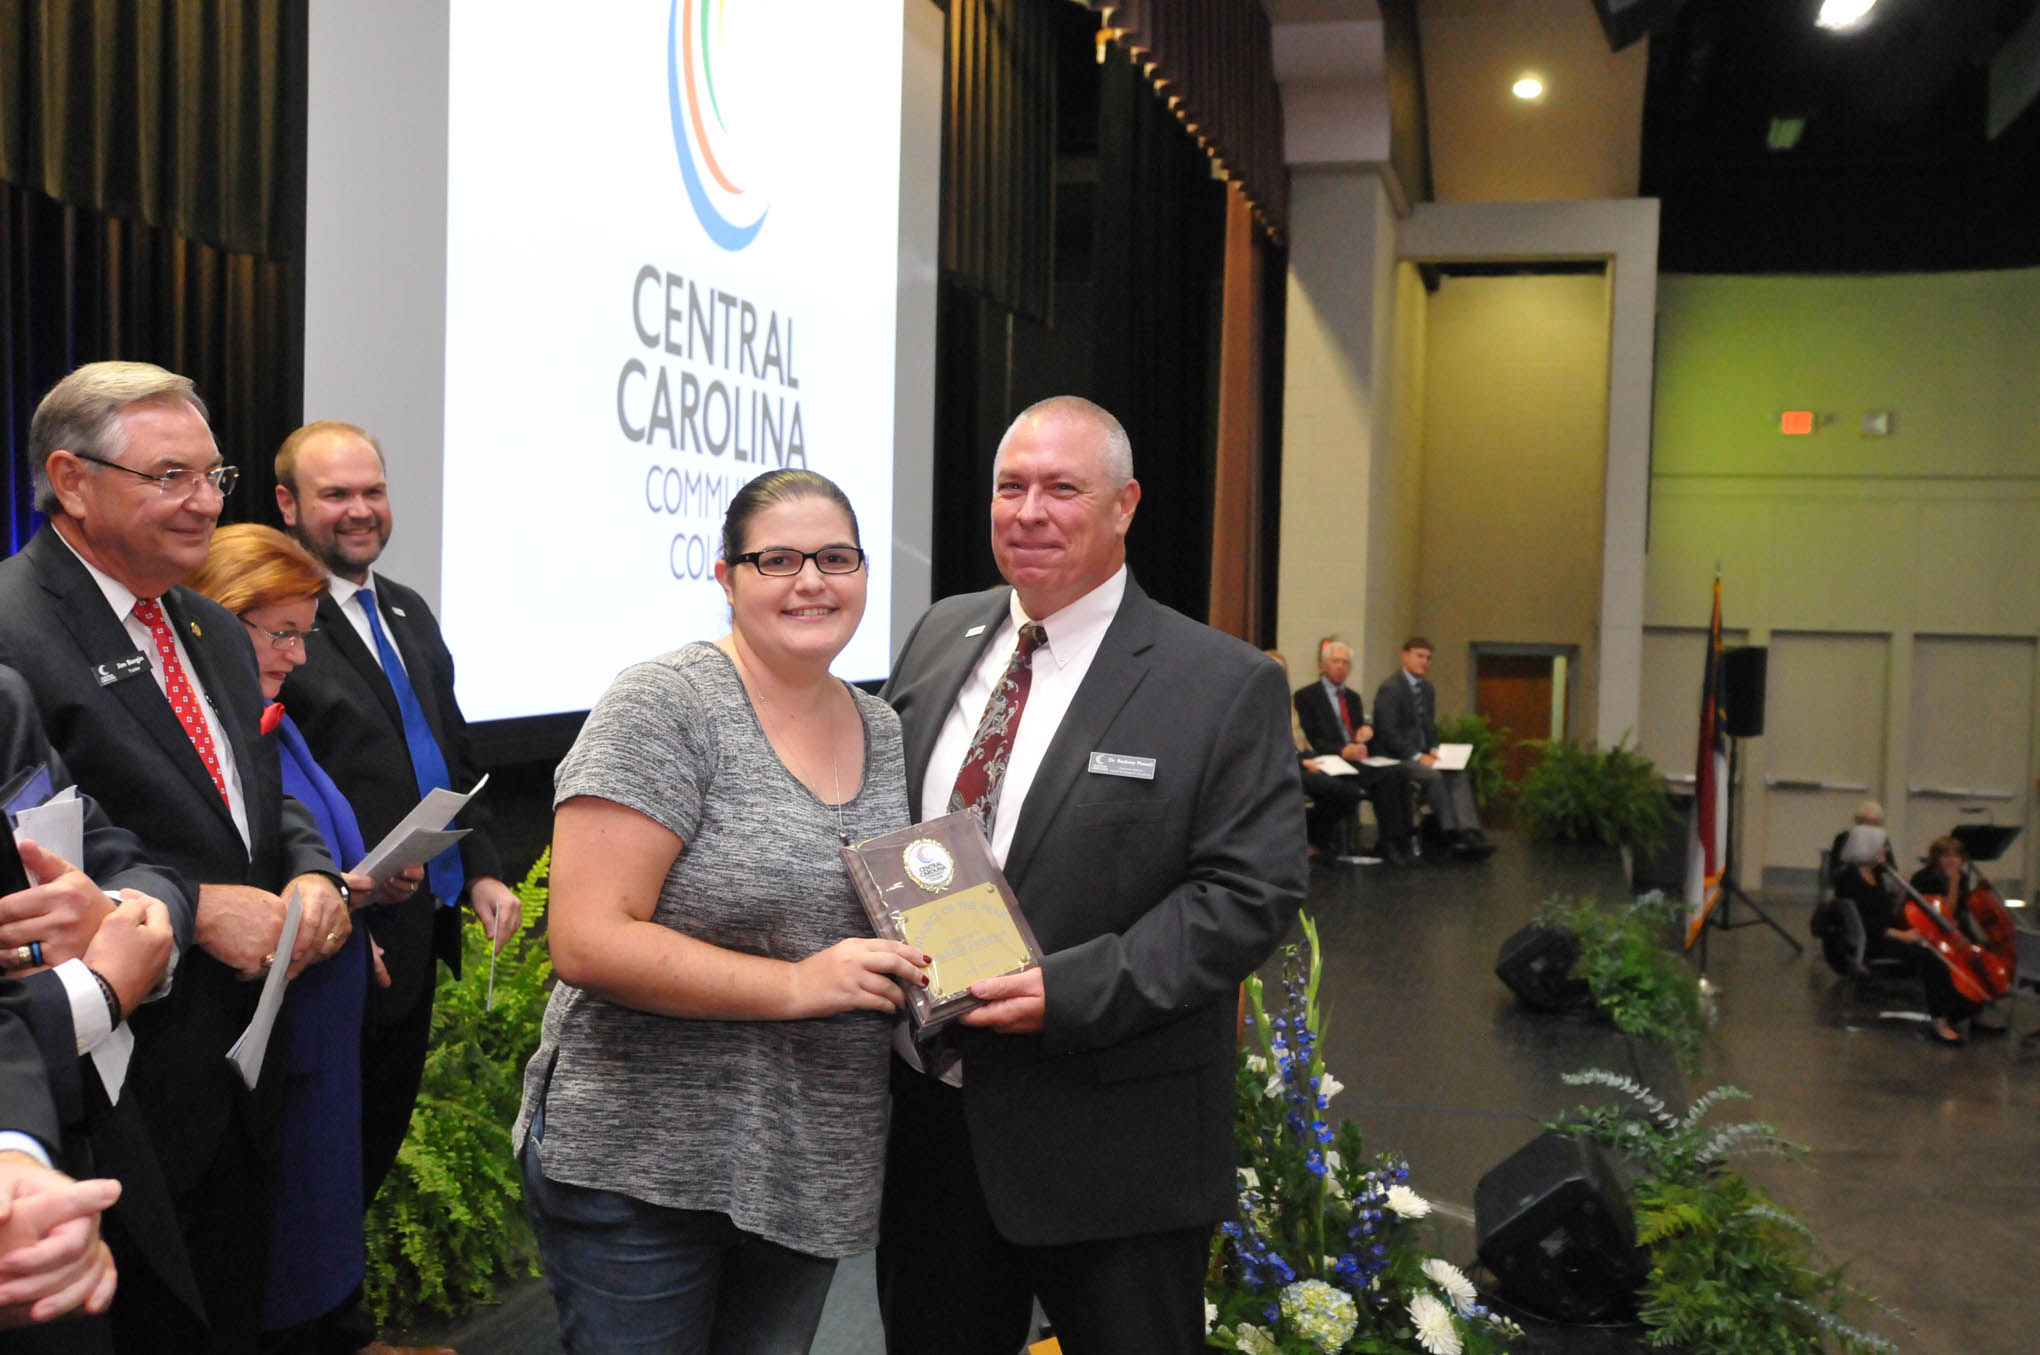 Click to enlarge,  Michelle Patterson (left), a Central Carolina Community College Veterinary Medical Technology Instructor, receives the Adjunct of the Year award from Dr. Rodney Powell (right), CCCC Executive Director of the Center for Academic Excellence, during the Convocation and Installation of Dr. Lisa M. Chapman as Sixth President of CCCC on Sept. 26. 